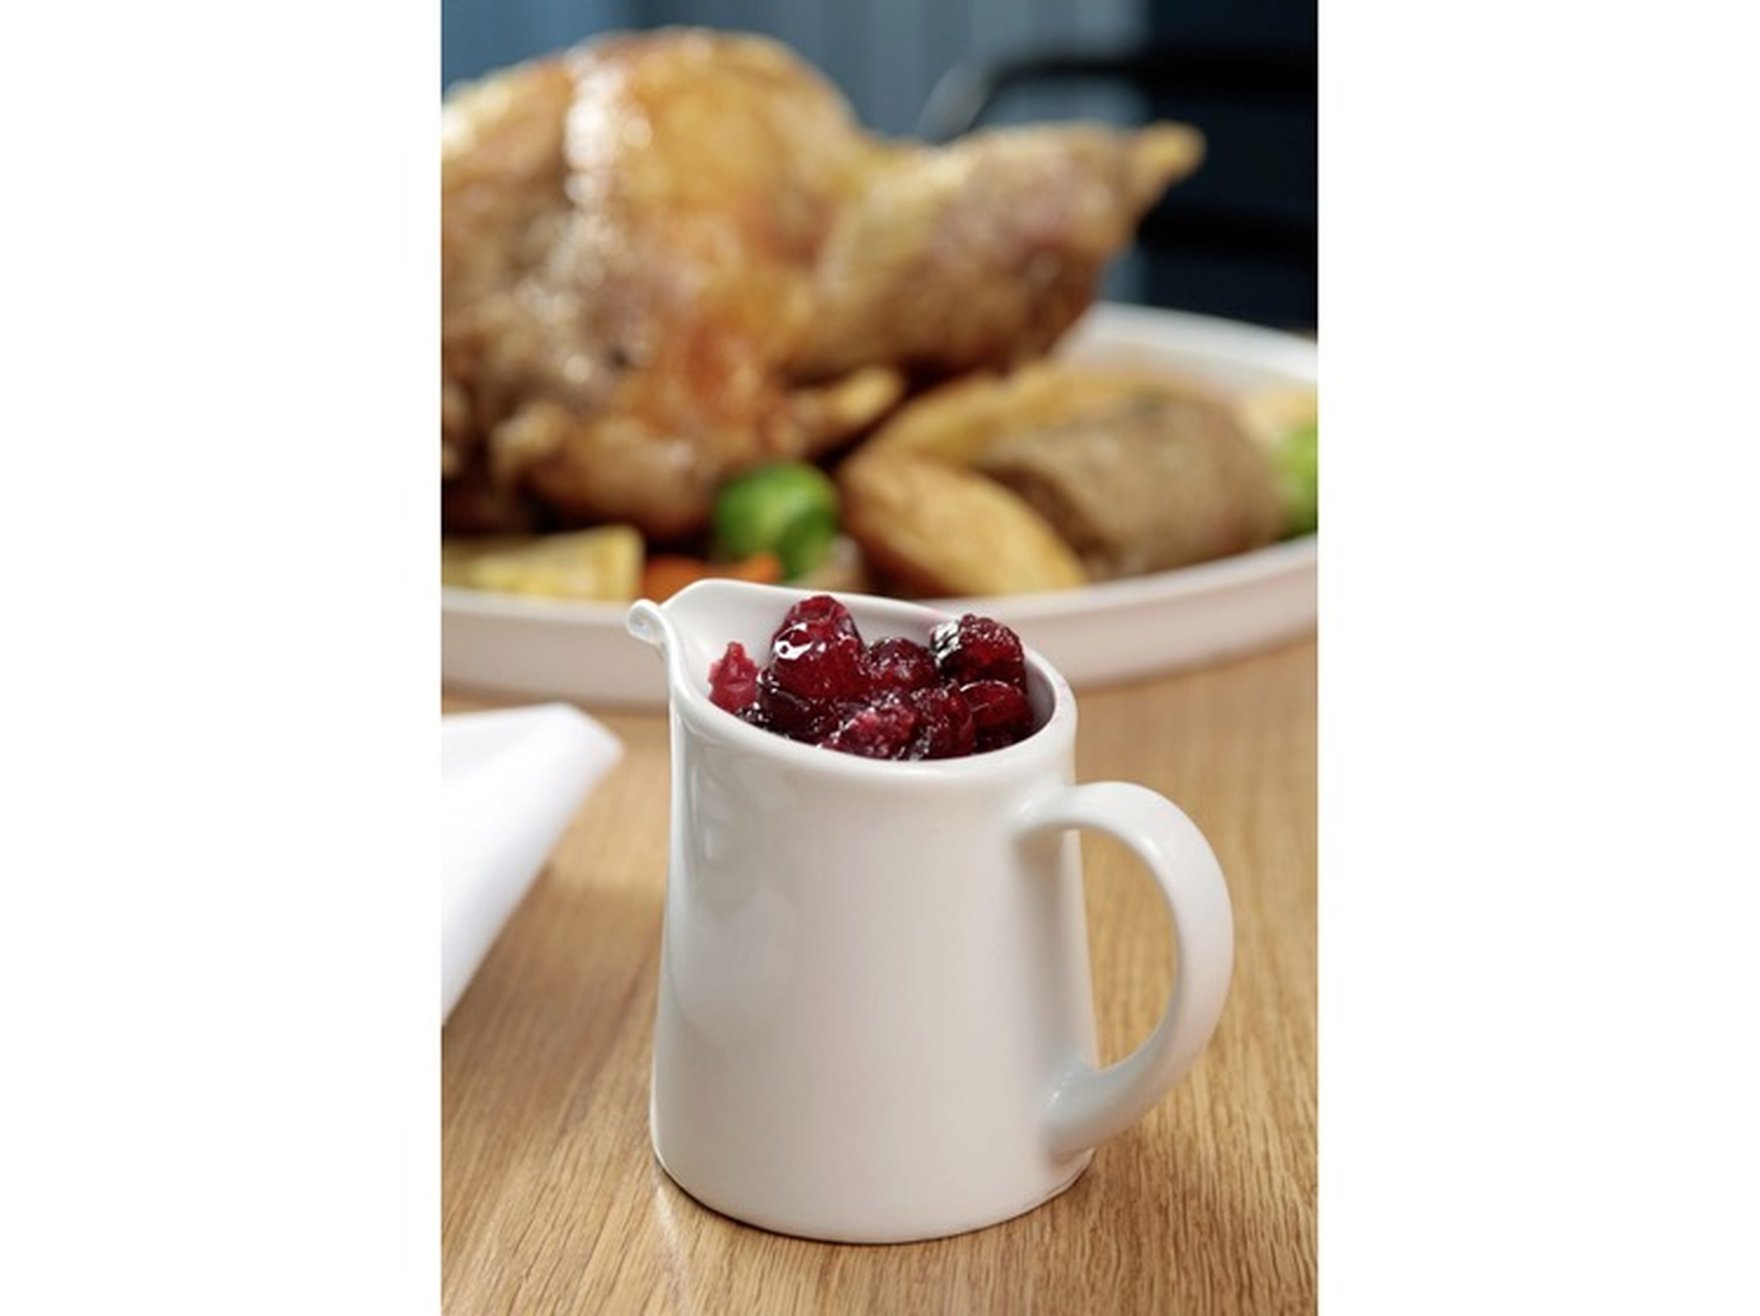 James St recipes: Christmas stuffing and cranberry jelly